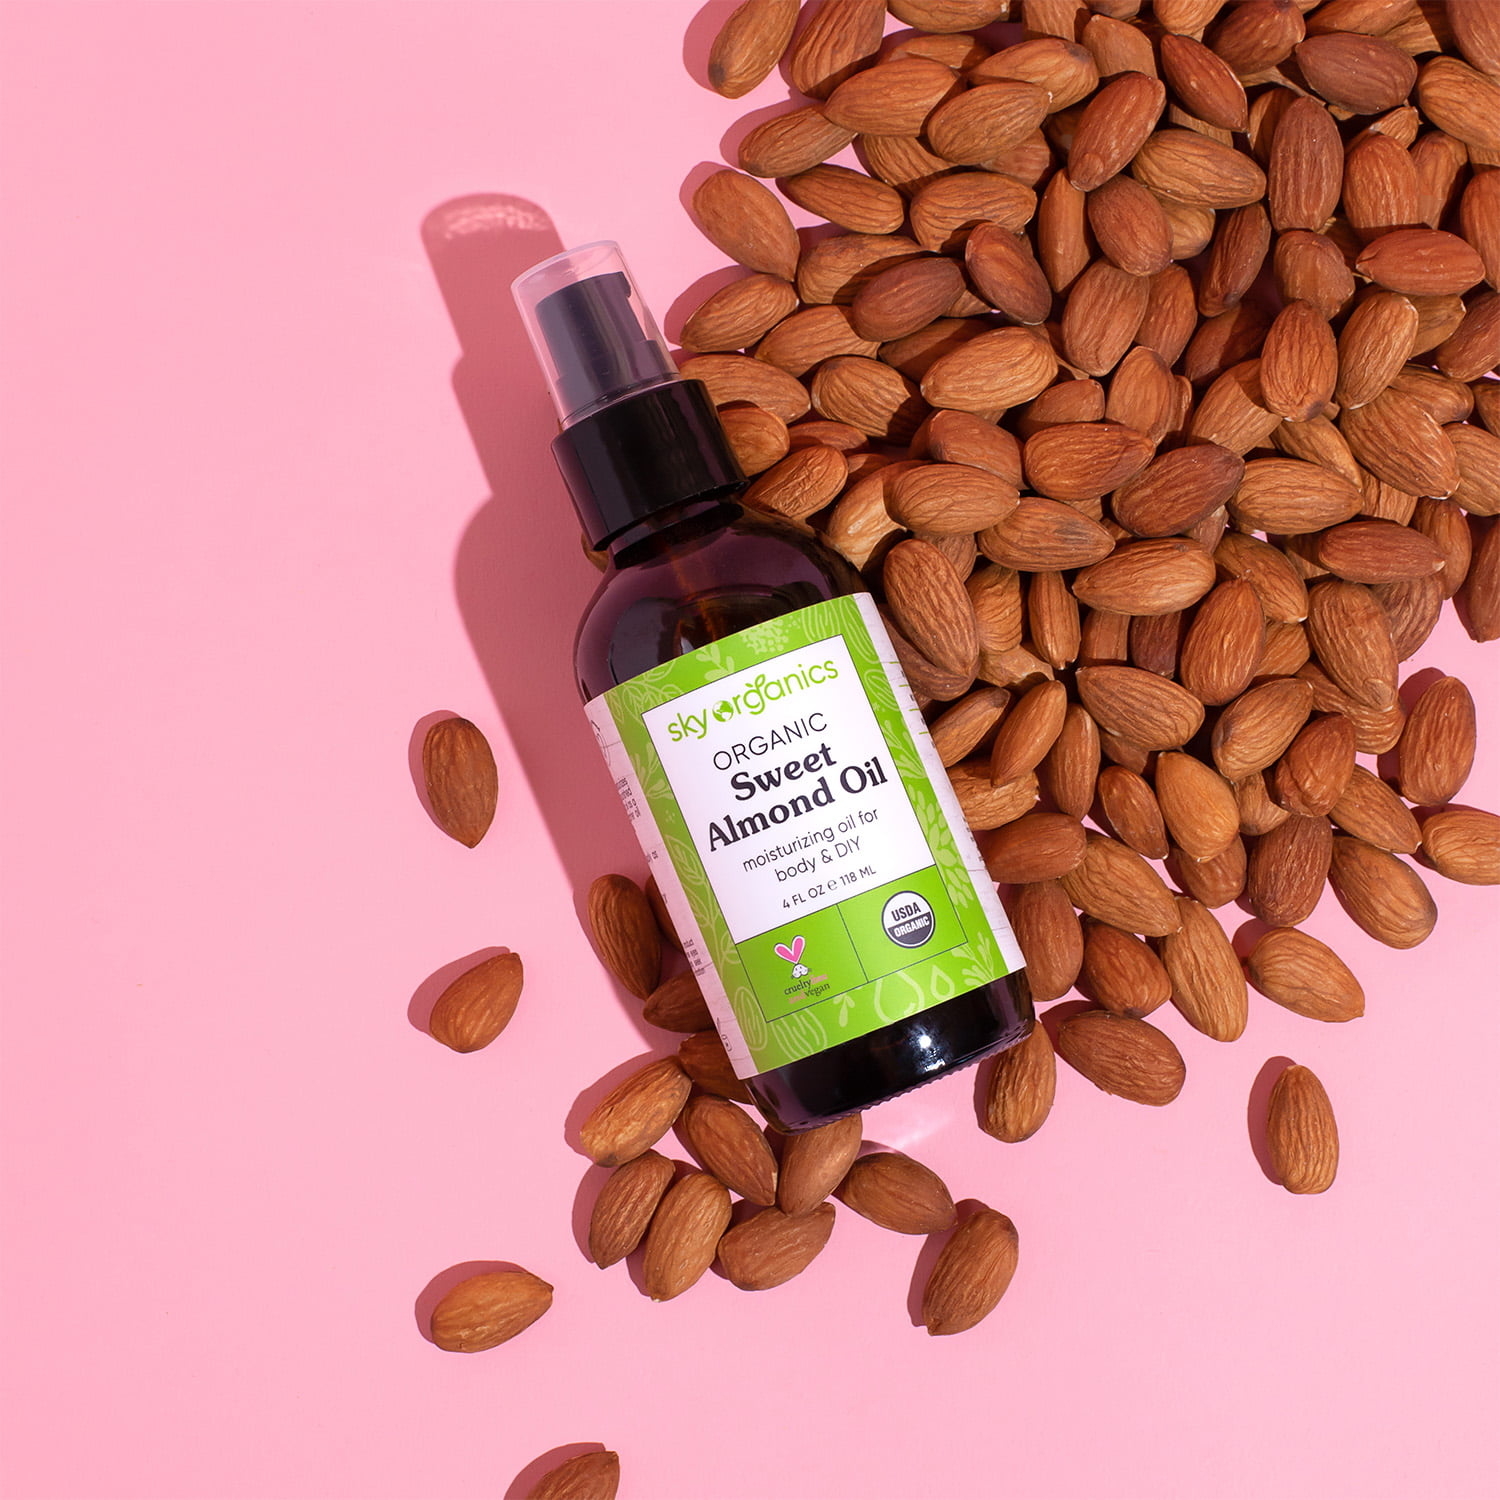 a product shot of the almond oil